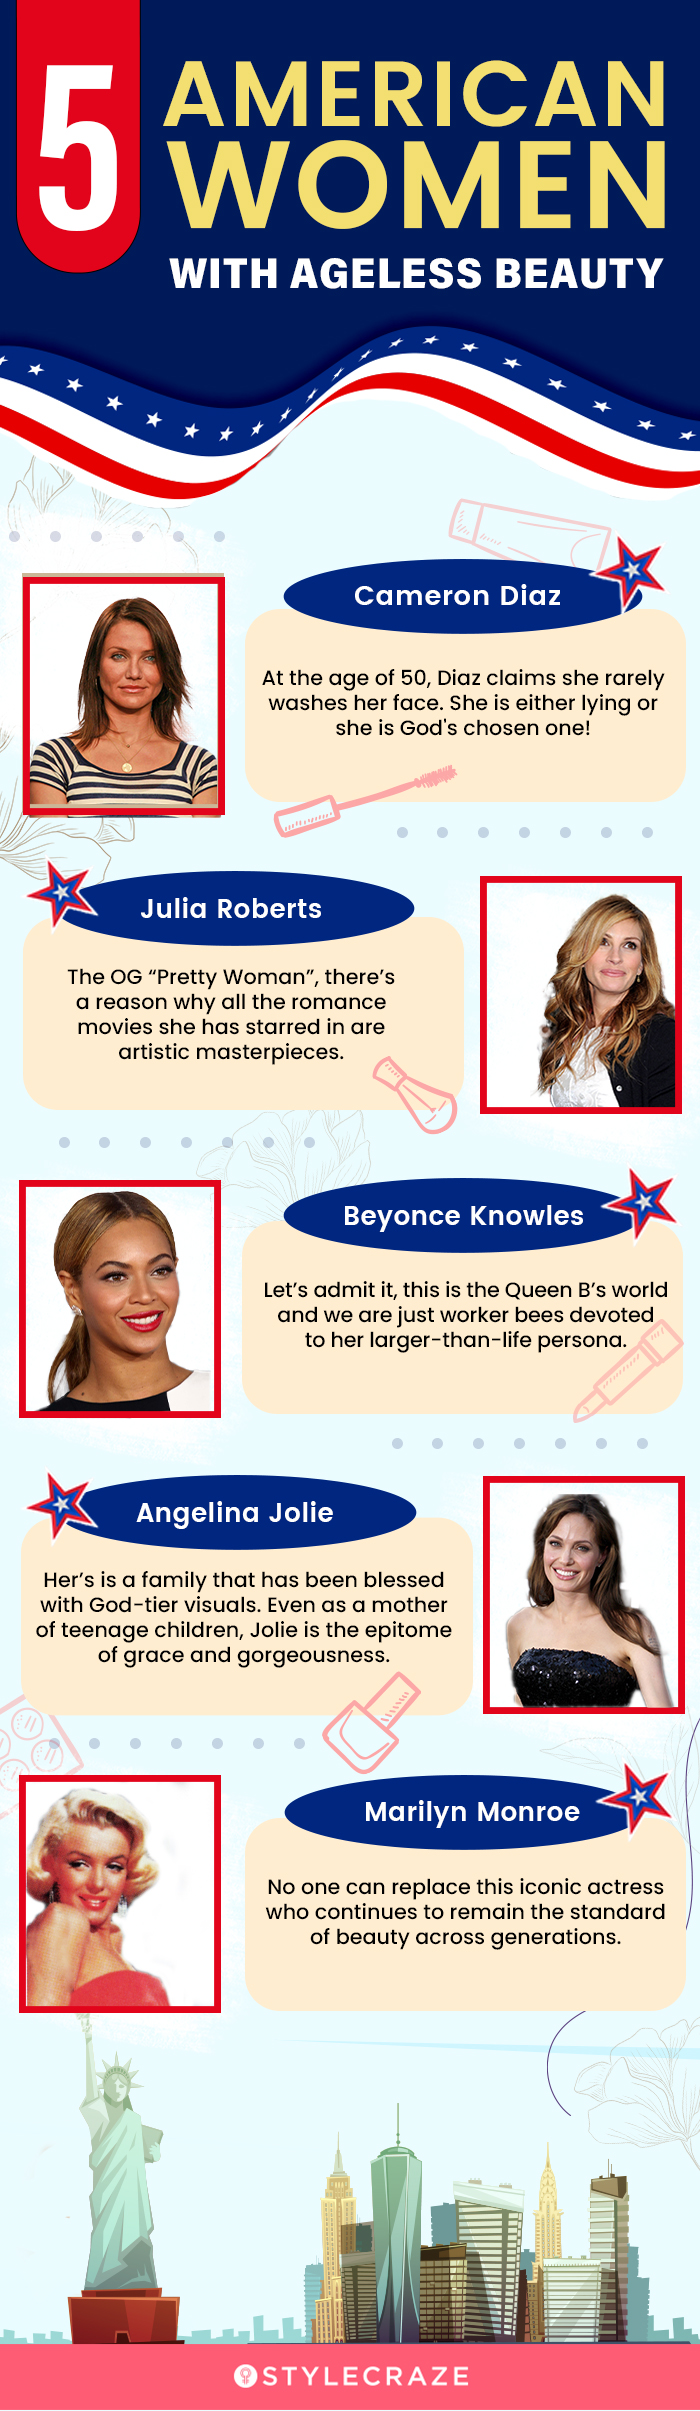 5 american women with ageless beauty (infographic)